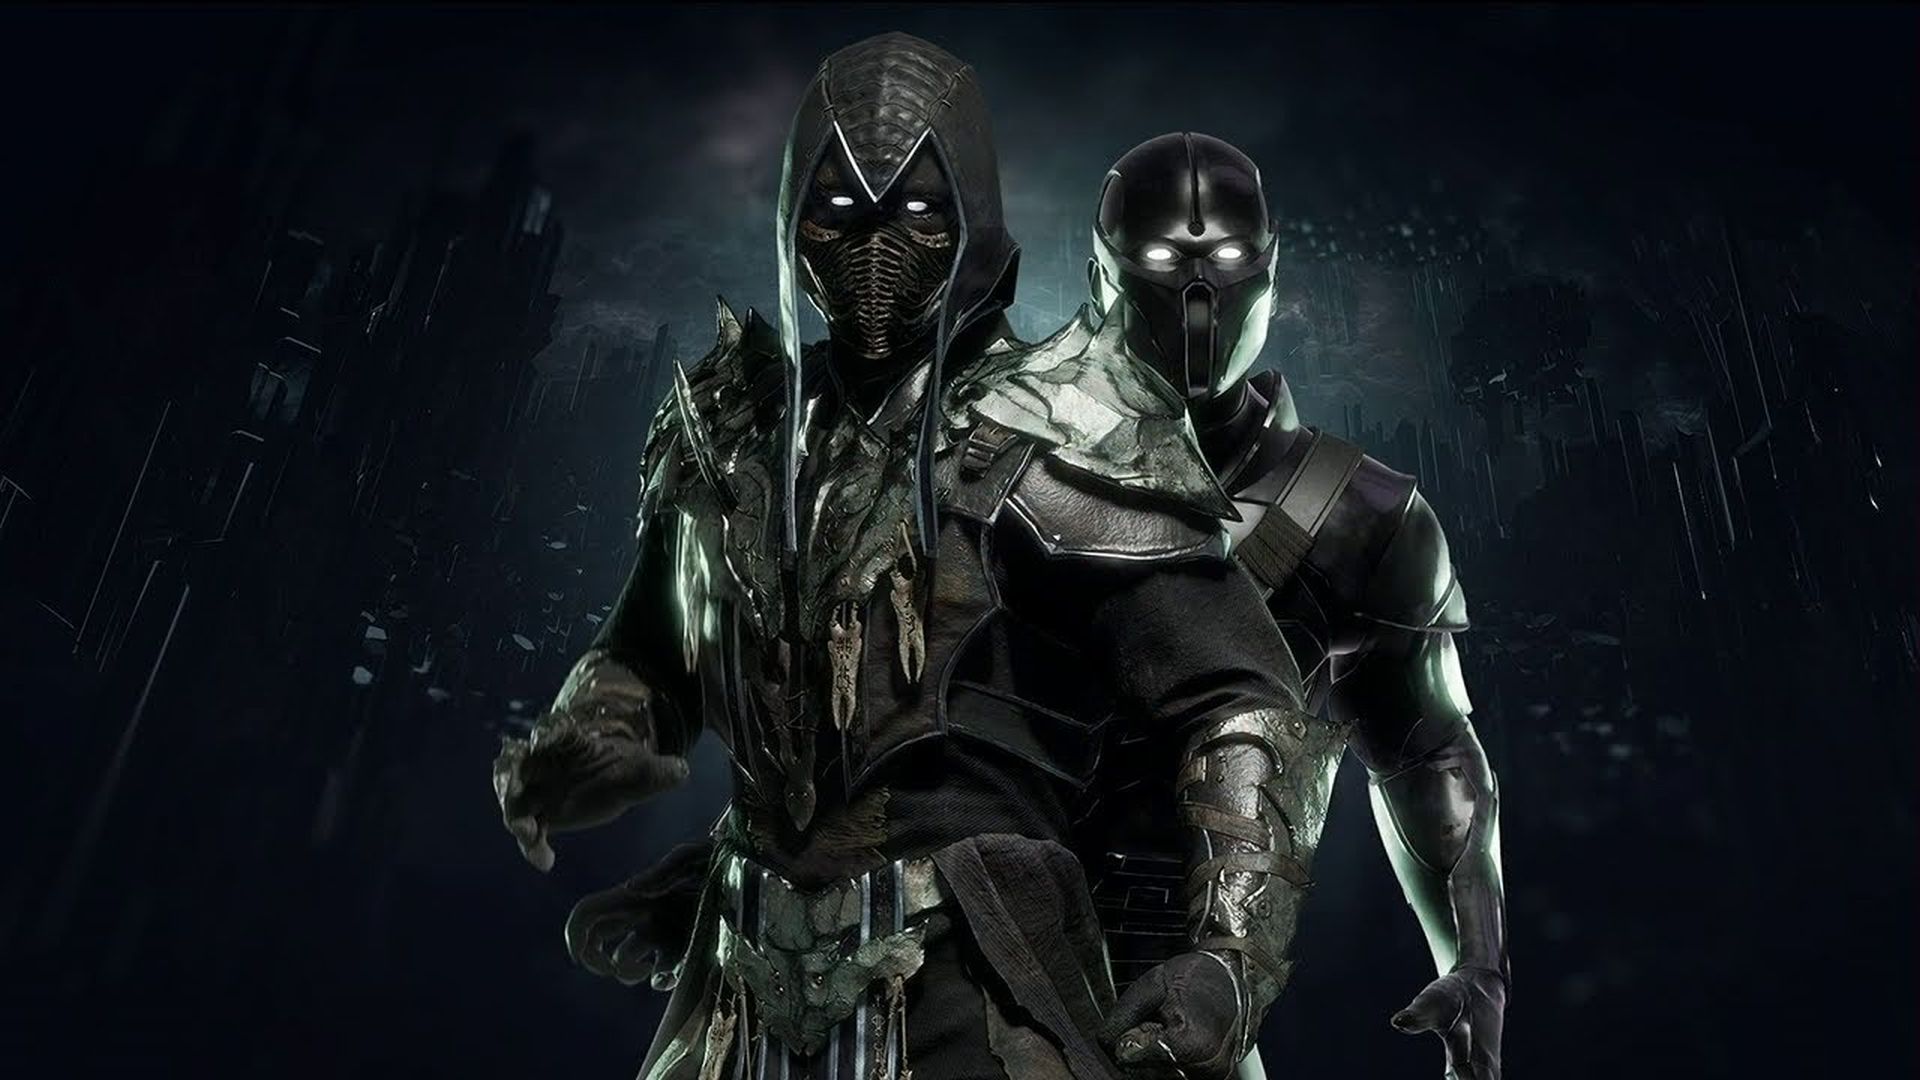 Mortal Kombat 1 Could Add Noob Saibot, Ghostface and More as Playable Characters – Rumor